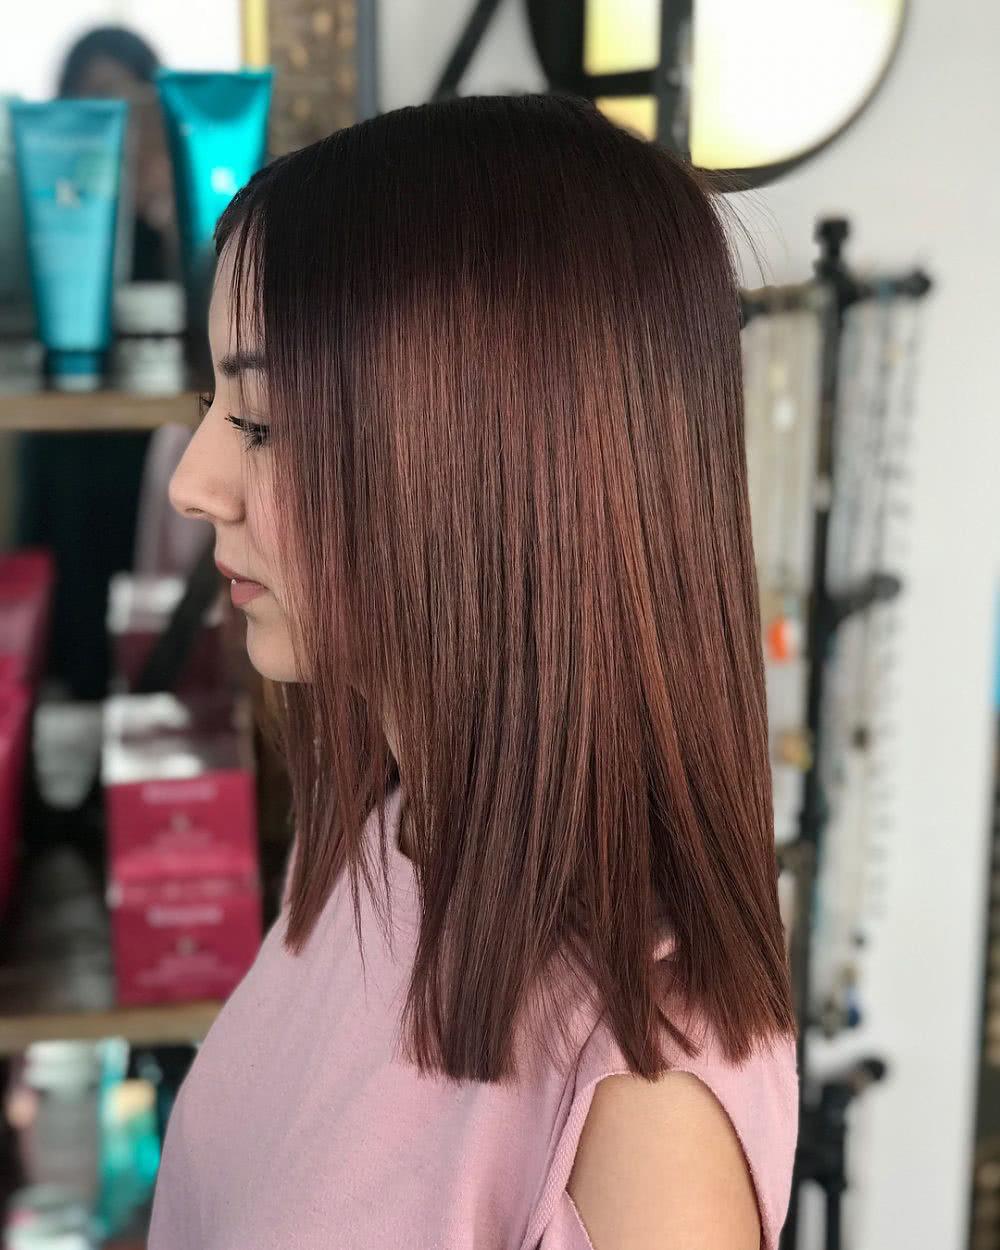 One-Length Lob with Blunt Ends Medium Hairstyle